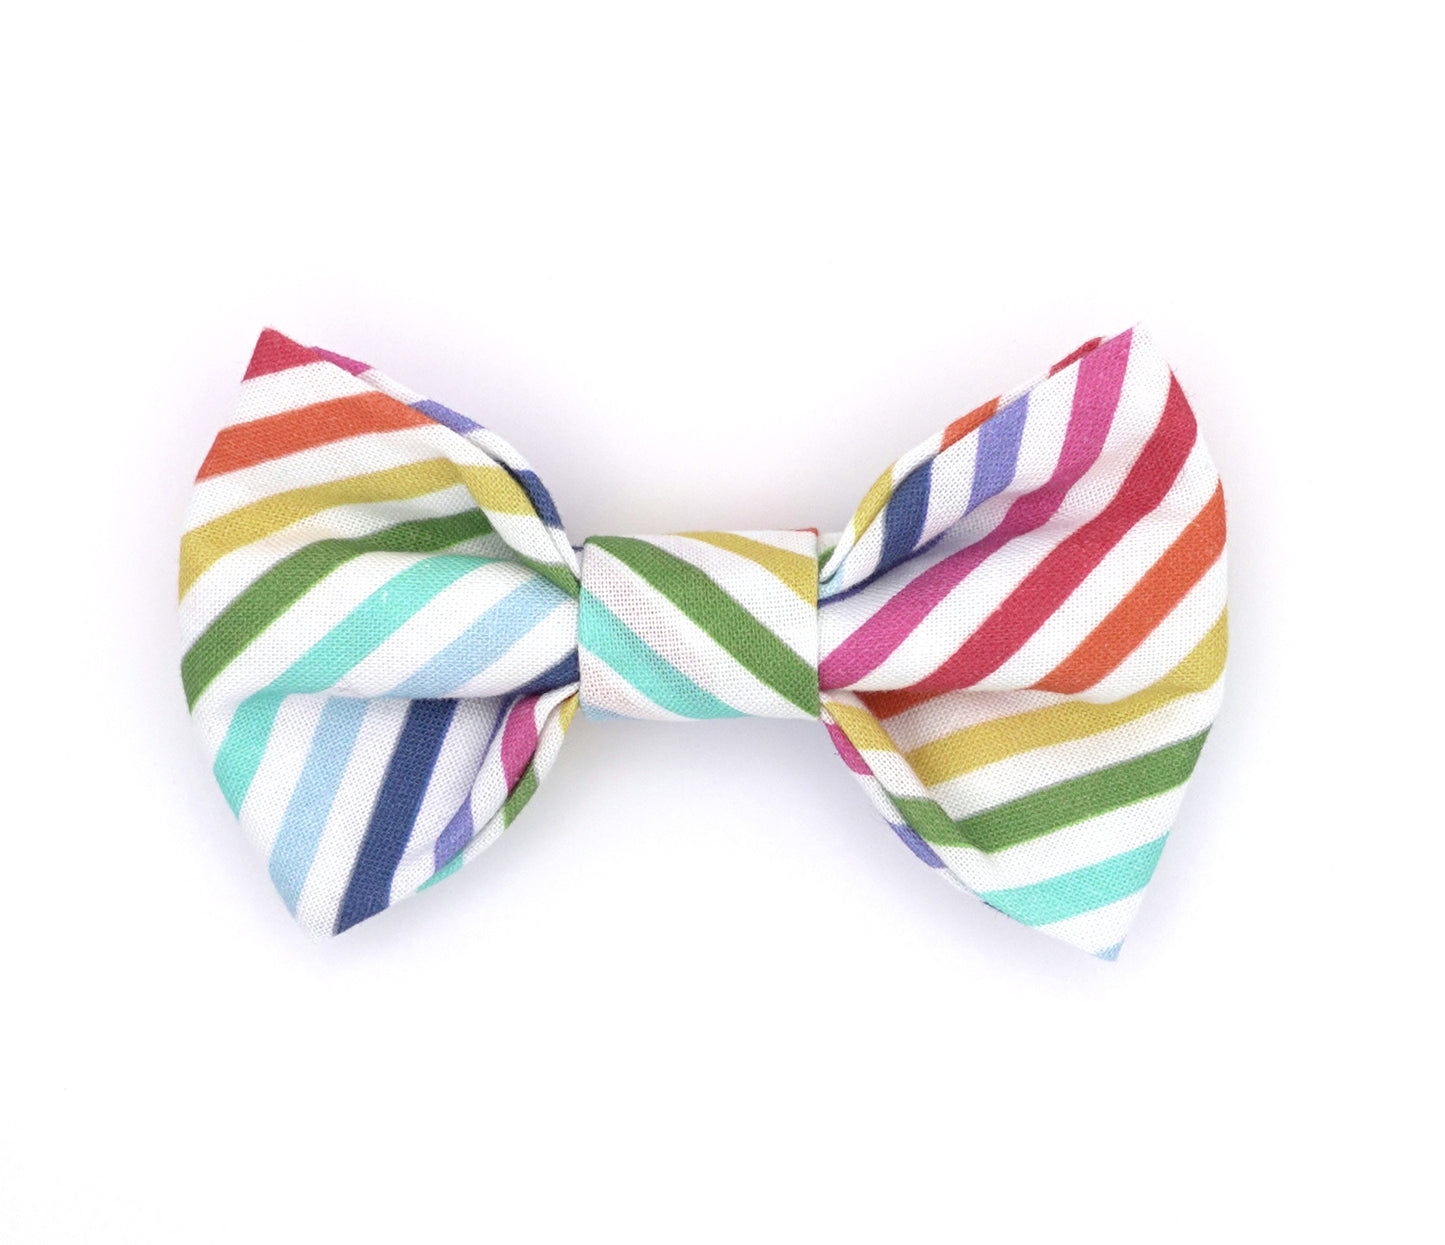 Handmade cotton bow tie for dogs (or other pets). Elastic straps on back with snaps make it easy to add to collar, harness, or leash. White background with rainbow stripes.